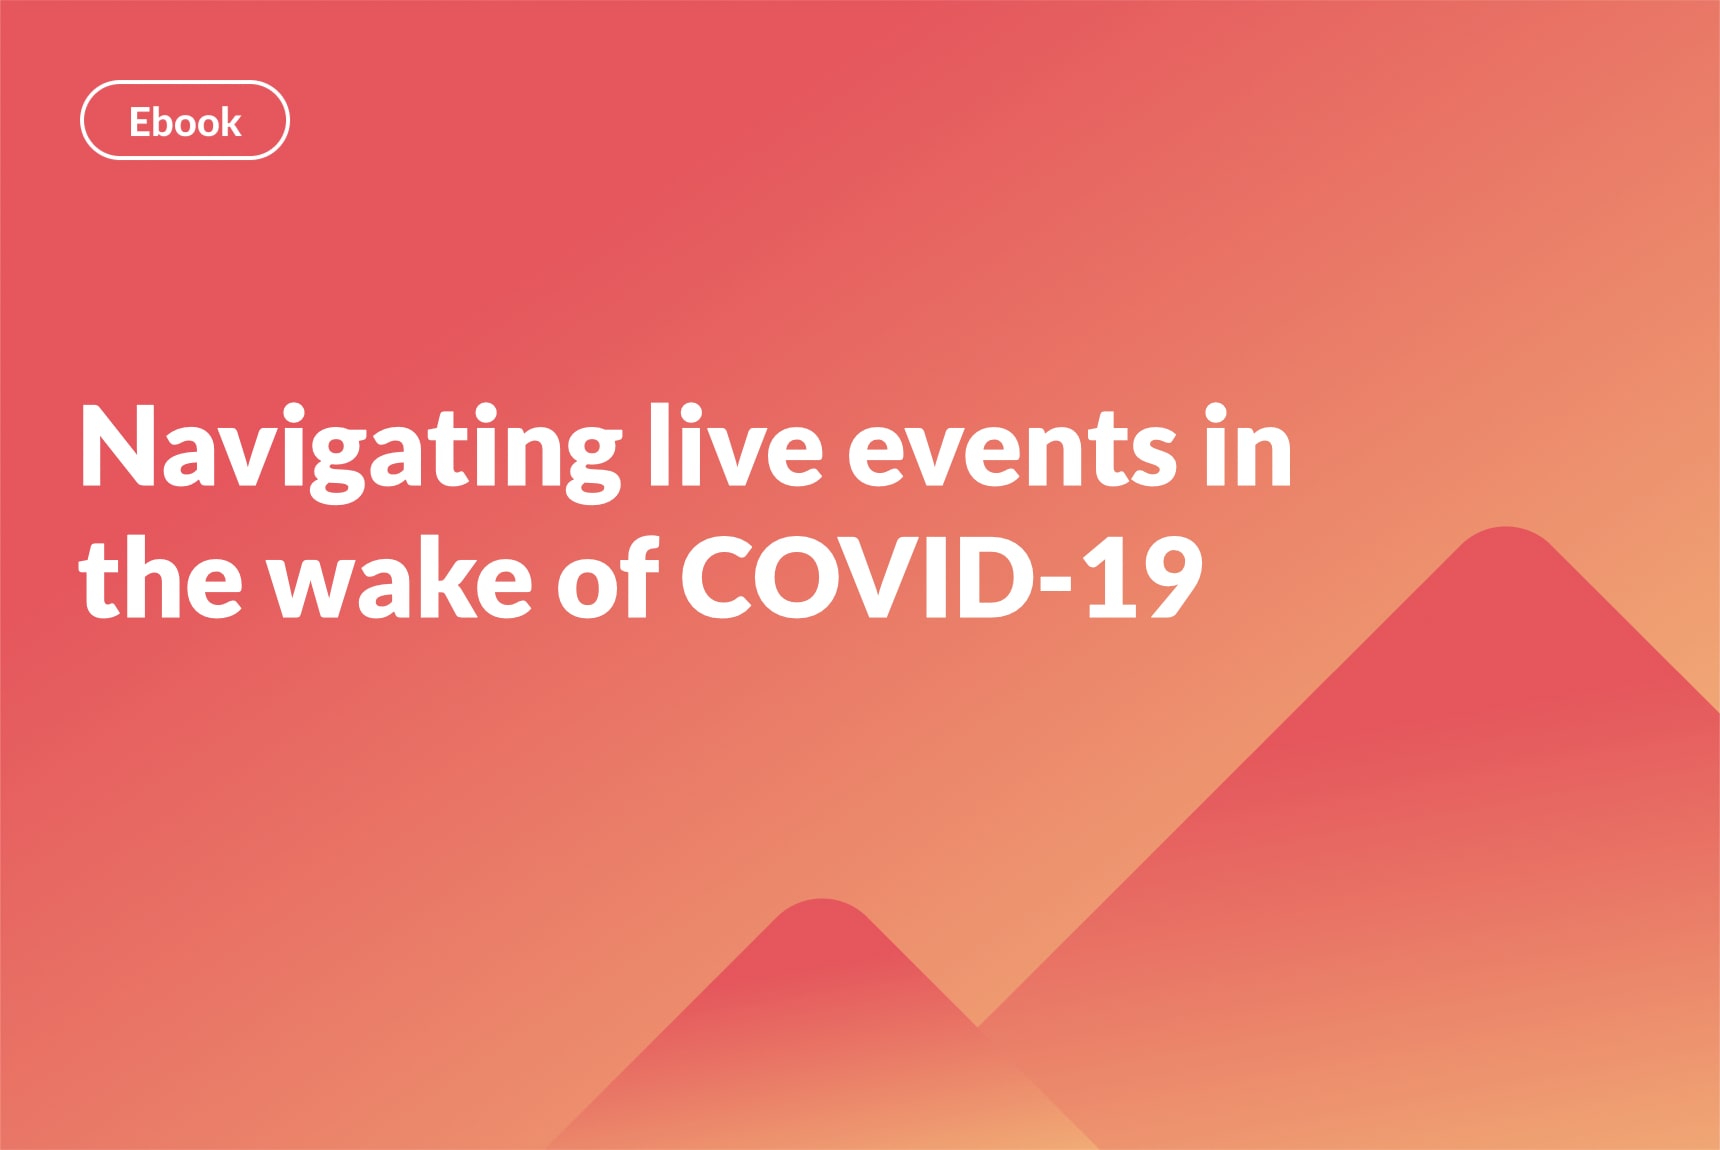 Cover image for the ebook, Navigating live events in the wake of COVID-19